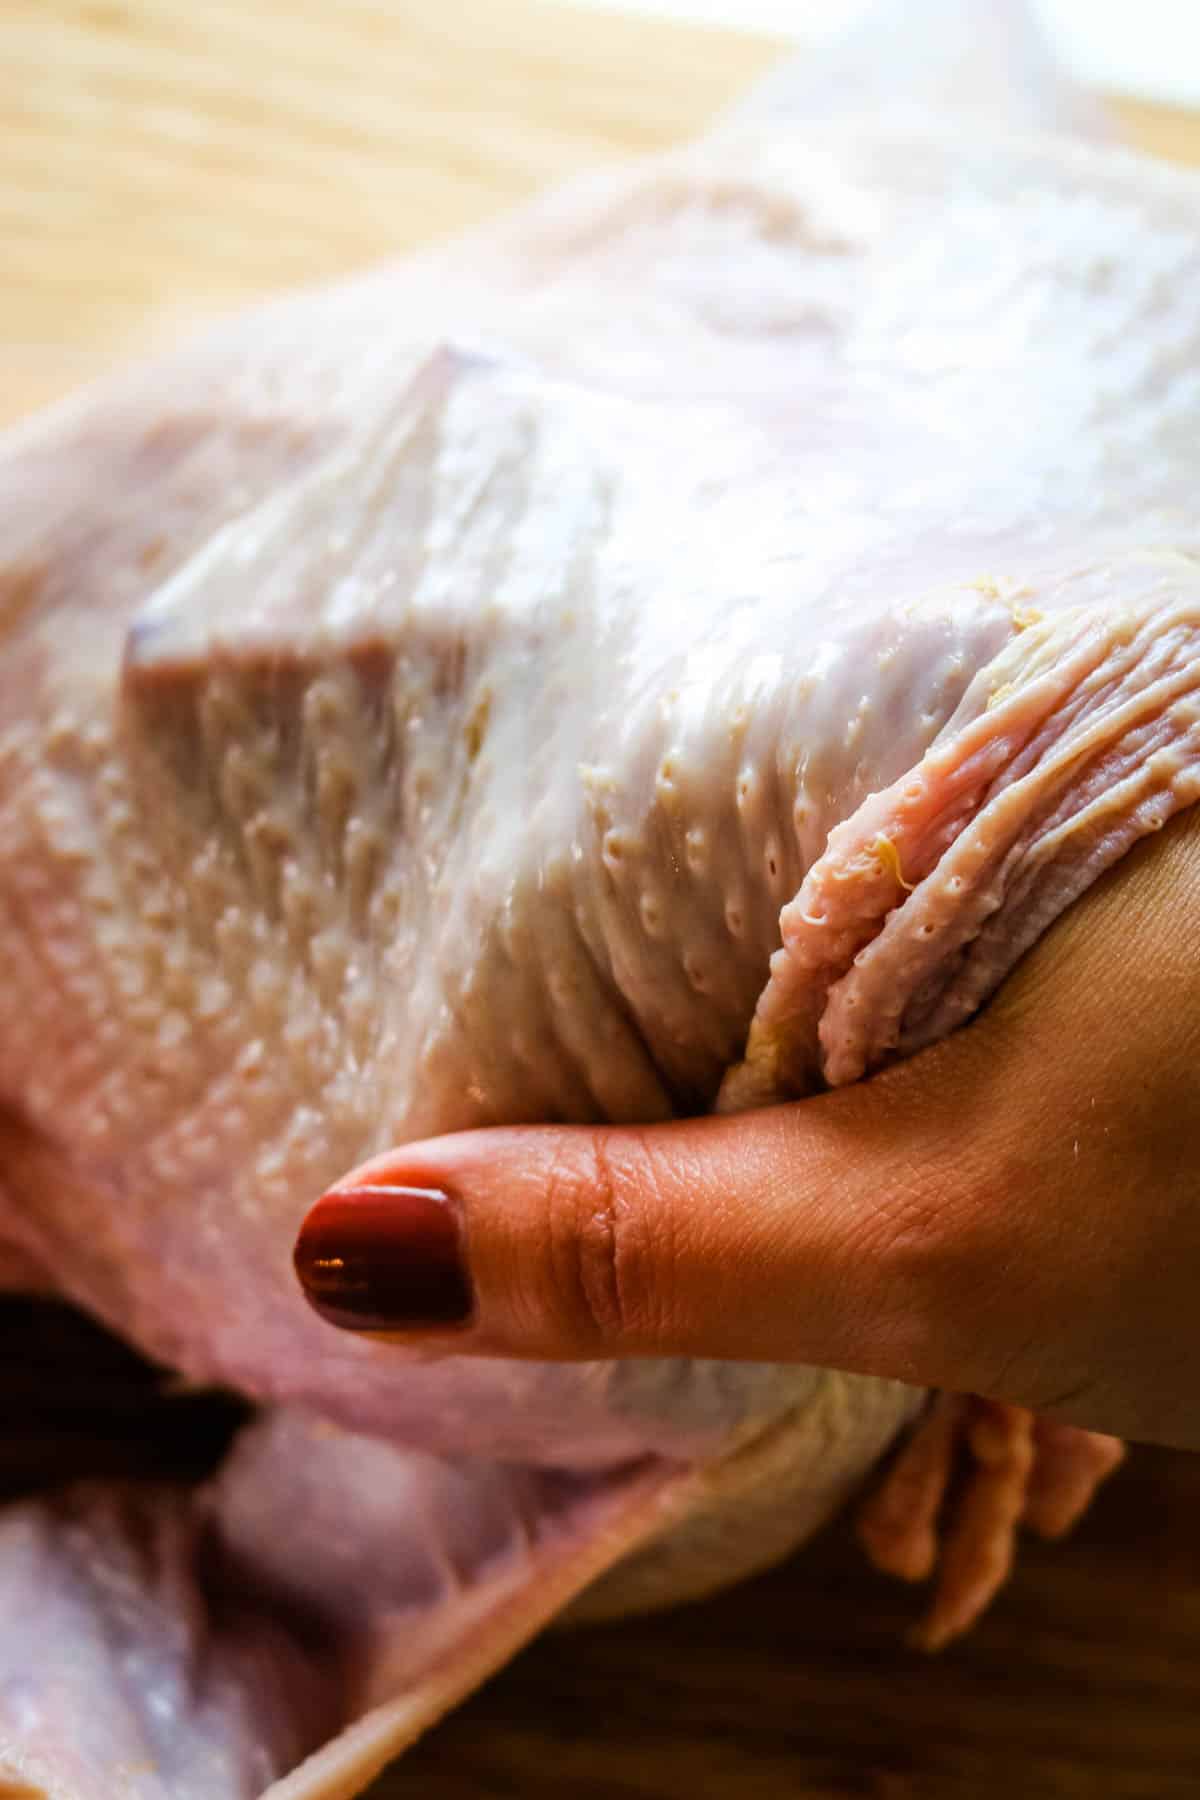 separating skin from meat in turkey.